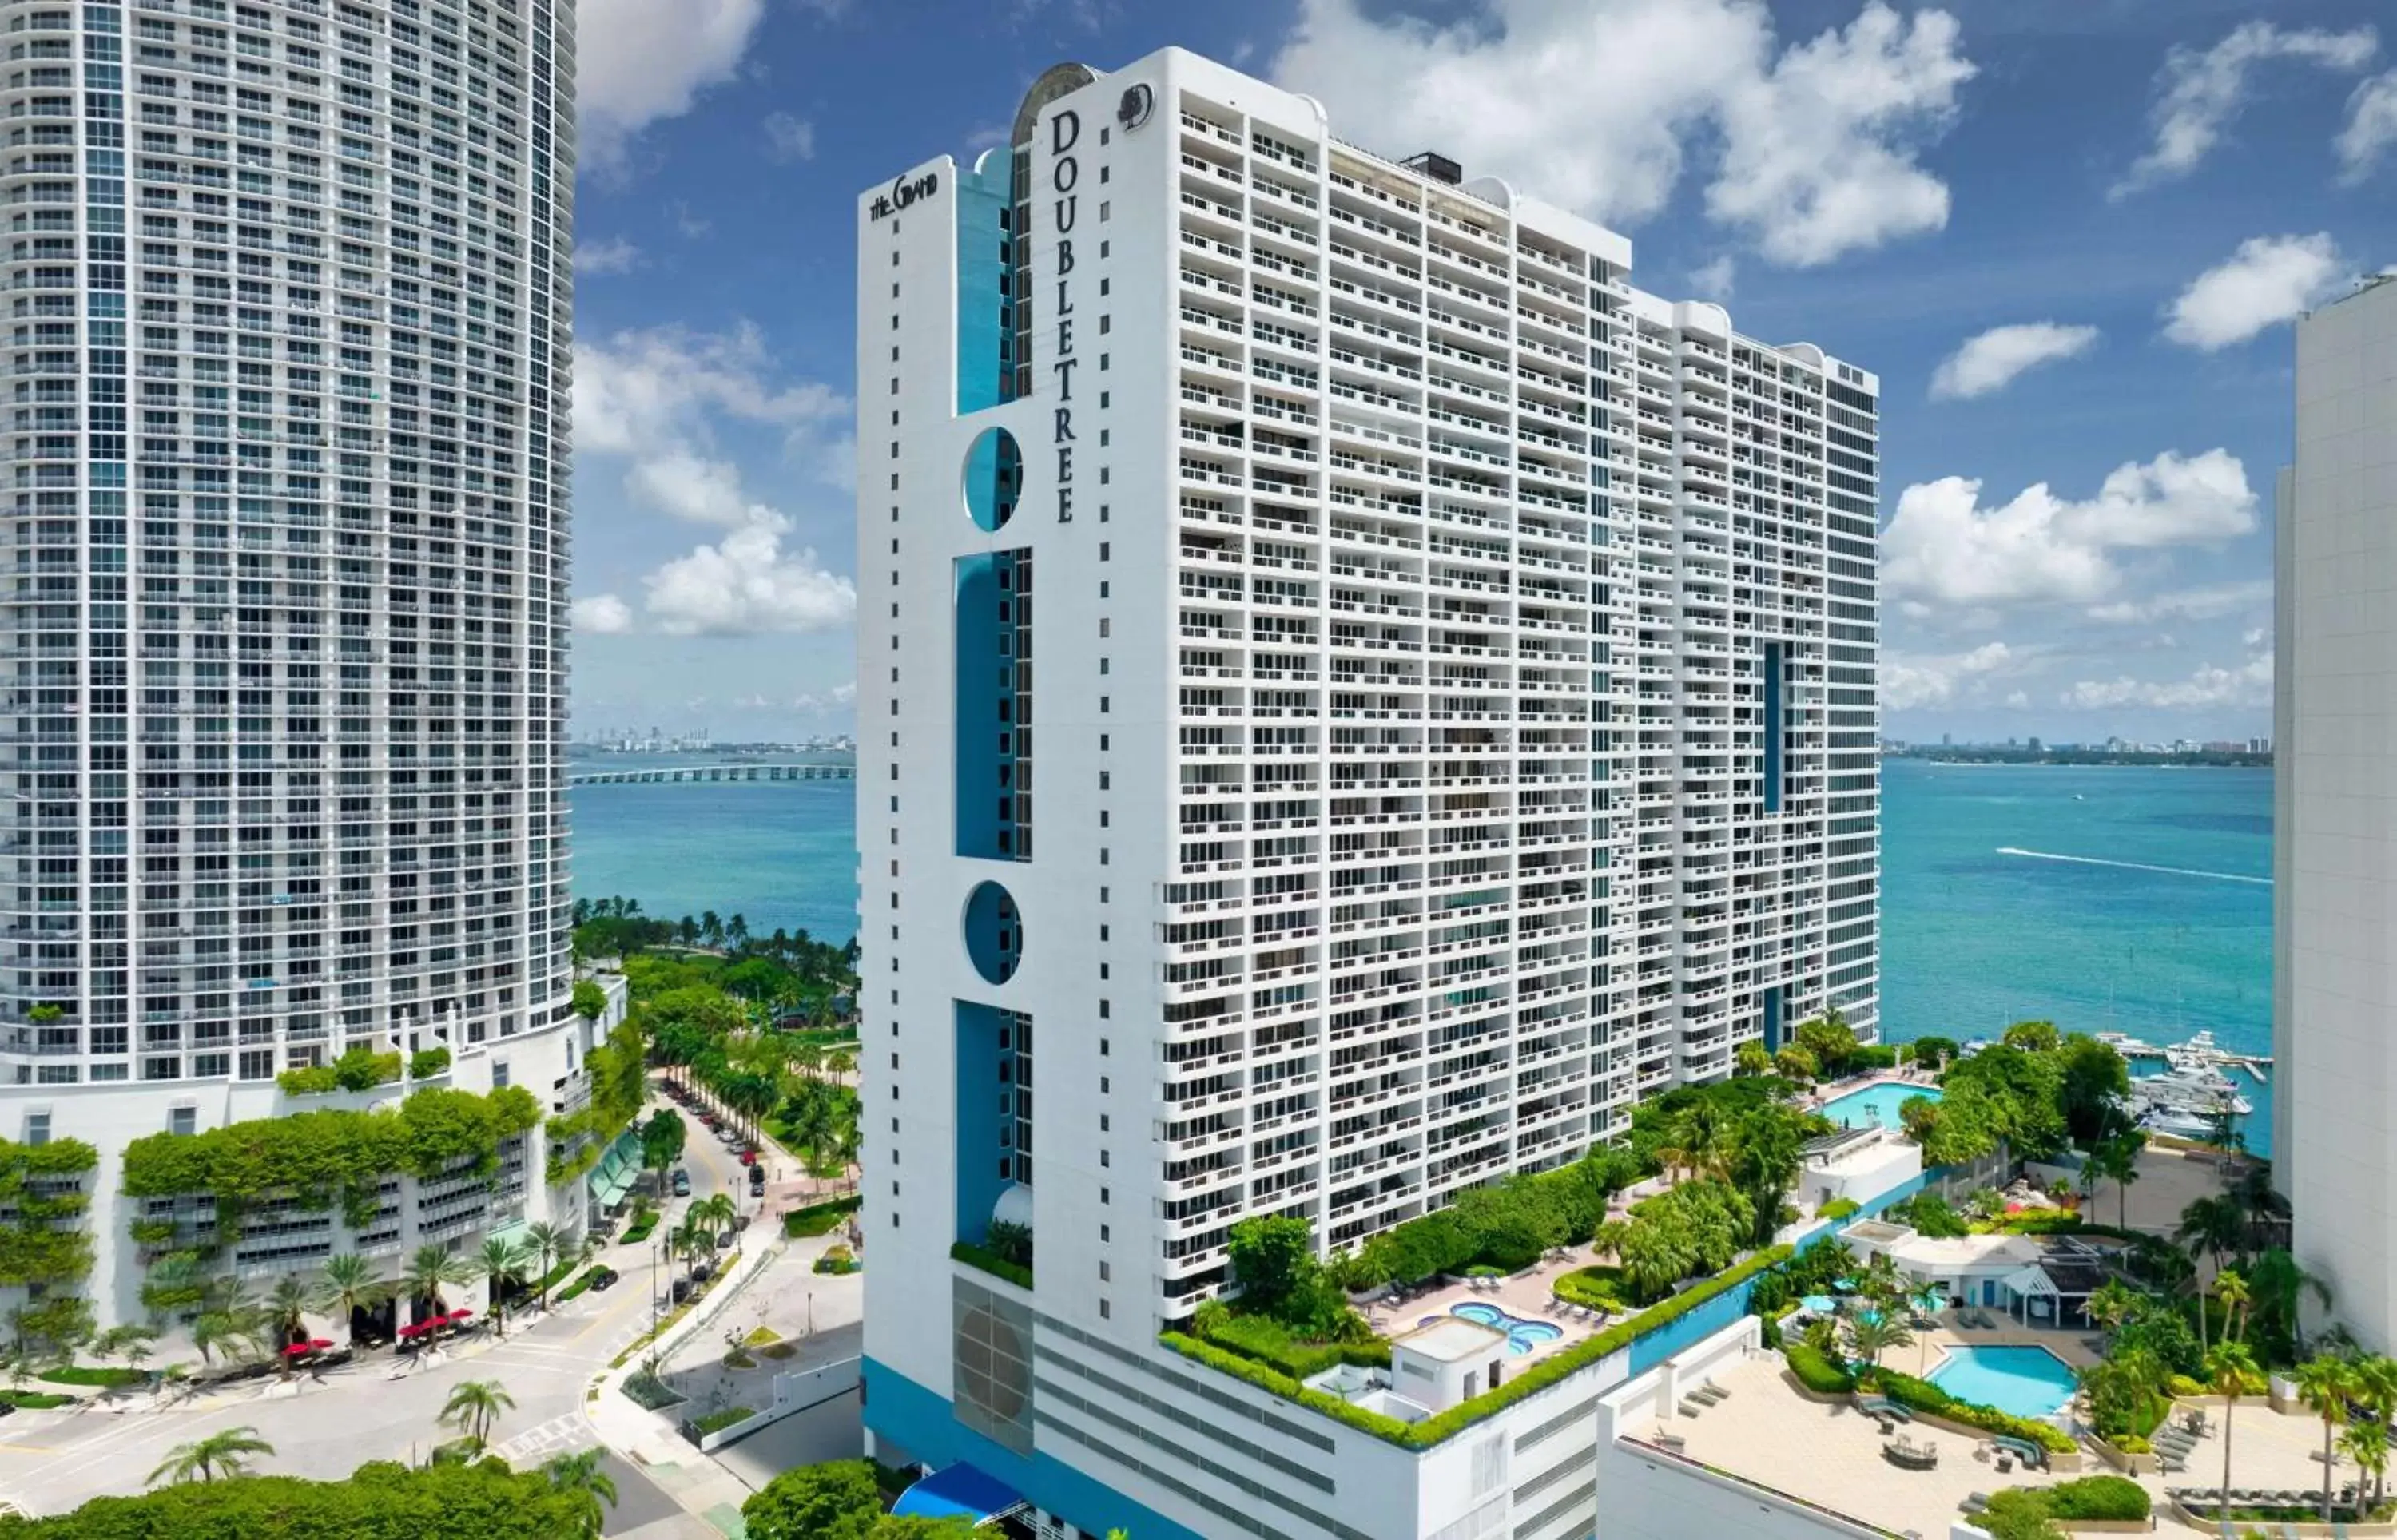 Property Building in DoubleTree by Hilton Grand Hotel Biscayne Bay